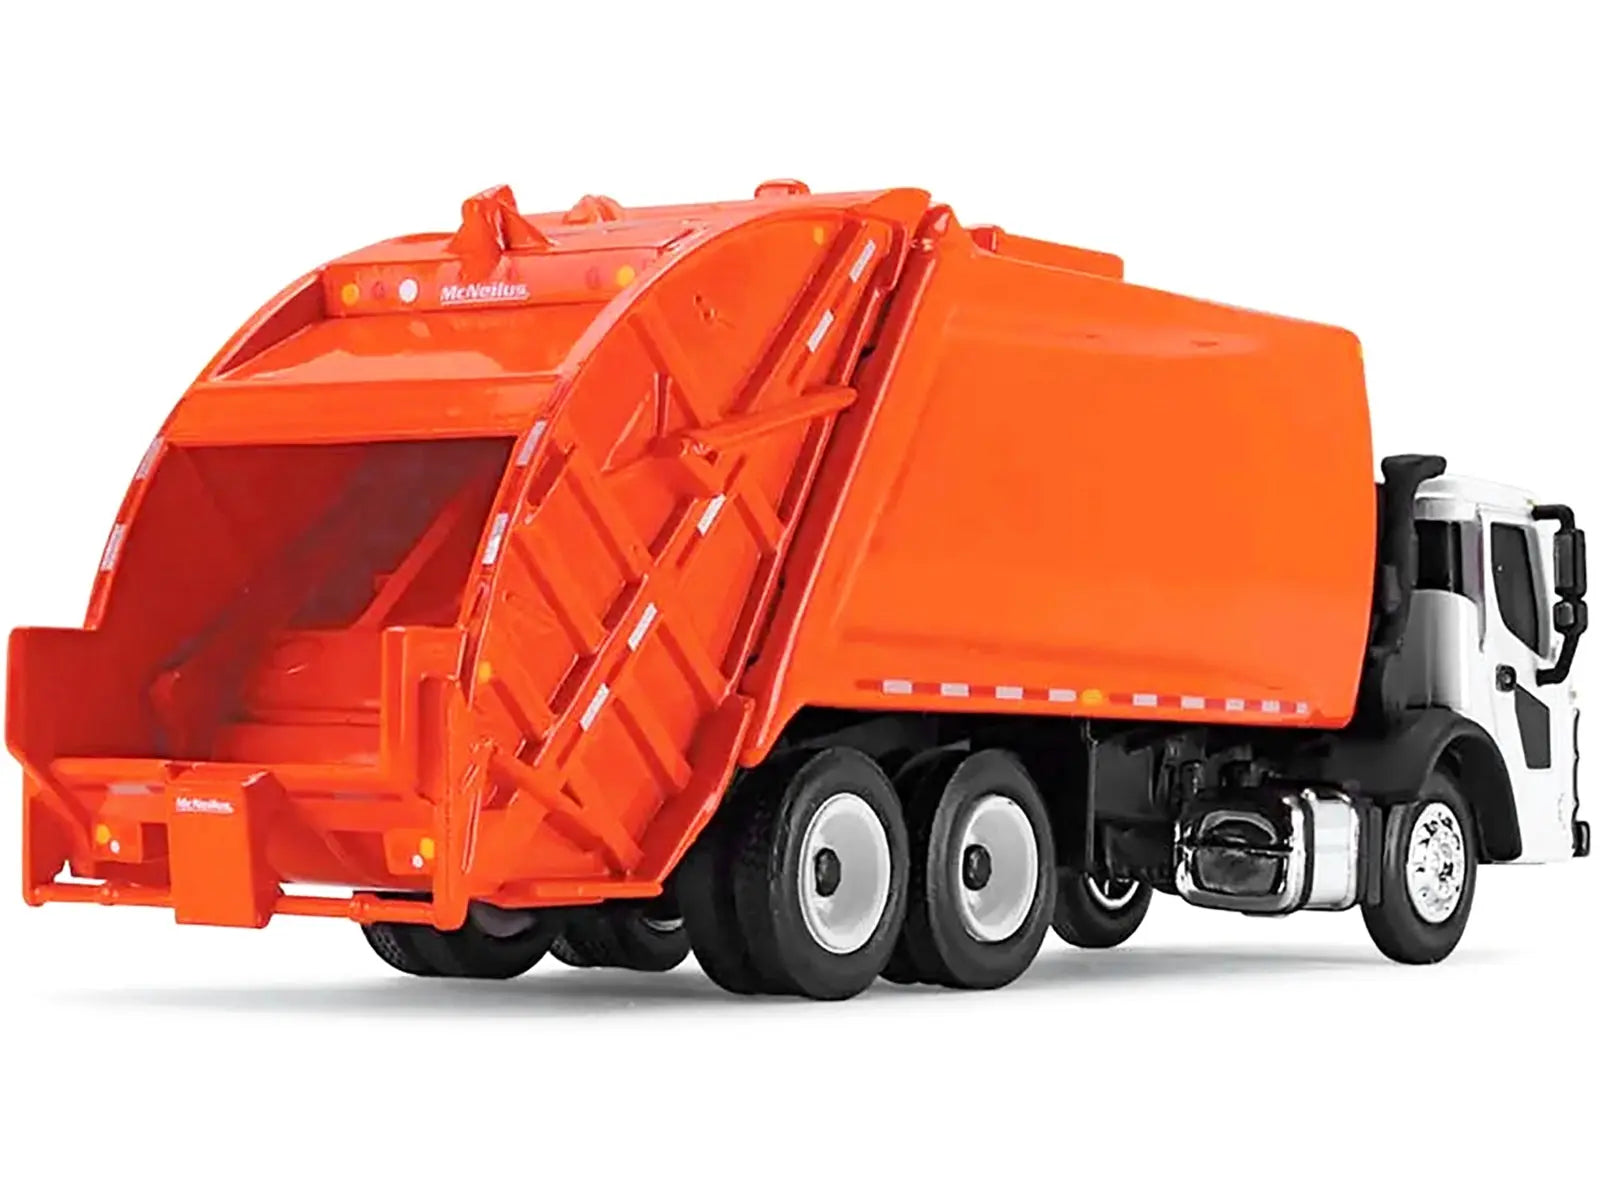 Mack LR with McNeilus Rear Load Refuse Body Orange and White 1/87 (HO) Diecast Model by First Gear First Gear